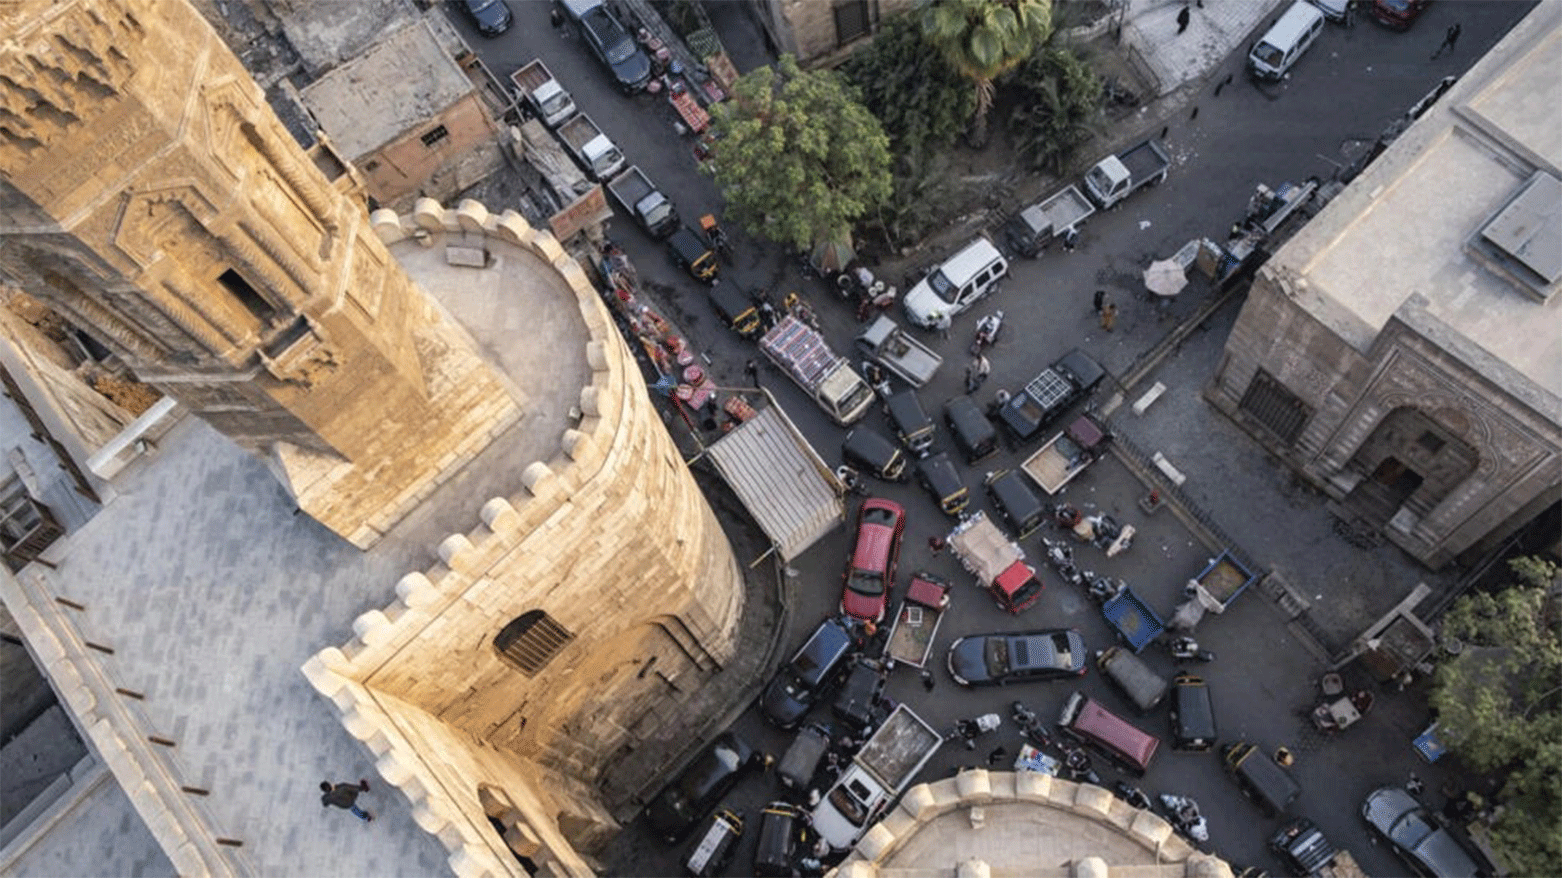 Bab Zeweila, one of three remaining medieval gates in the old city walls of Cairo. (Photo: AFP)